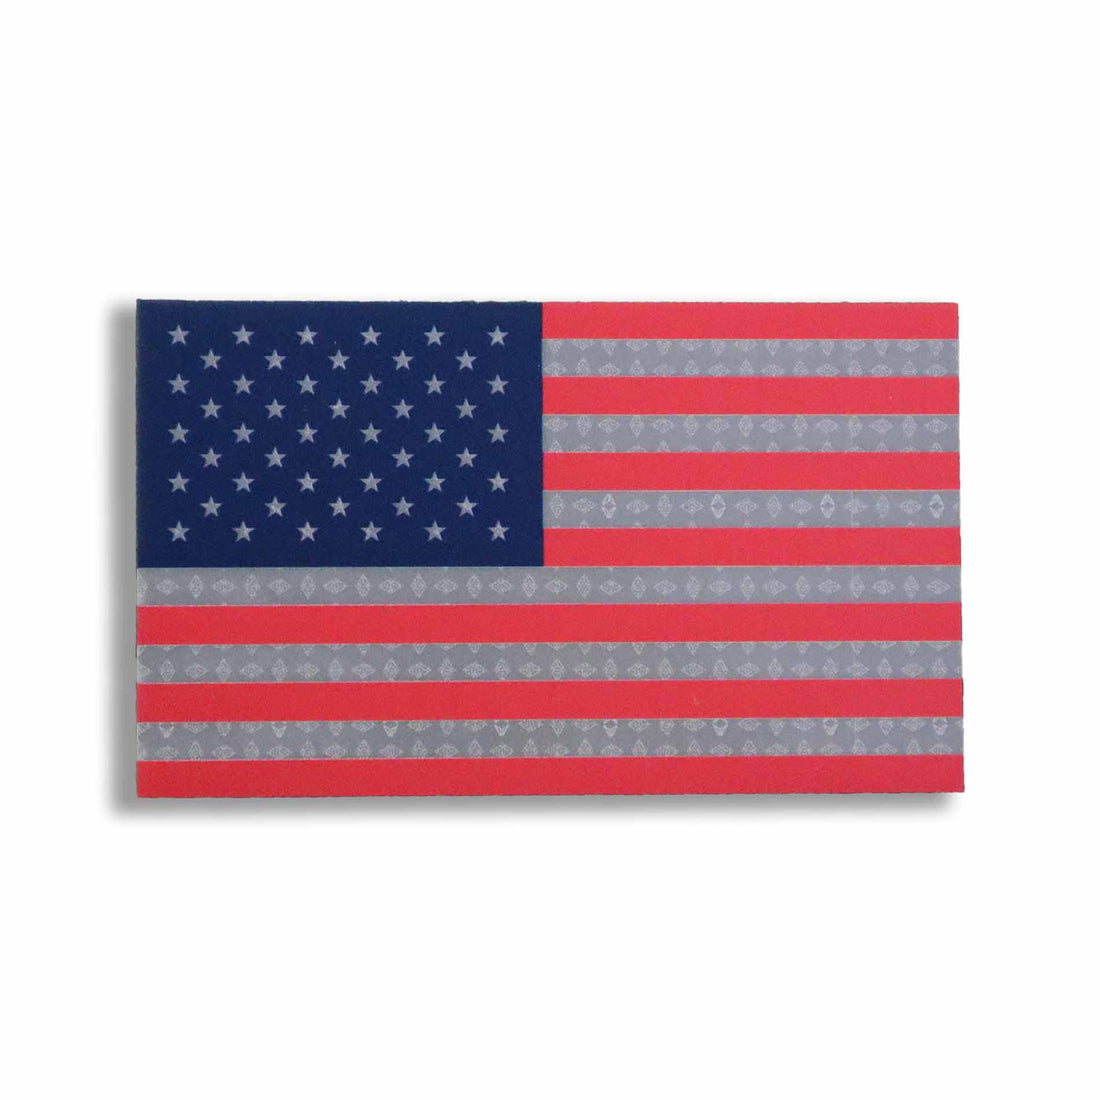 Supplies - Identification - Uniform Patches - IR.Tools™ GARRISON Infrared IR Forward American US Flag Patch - 3x5"